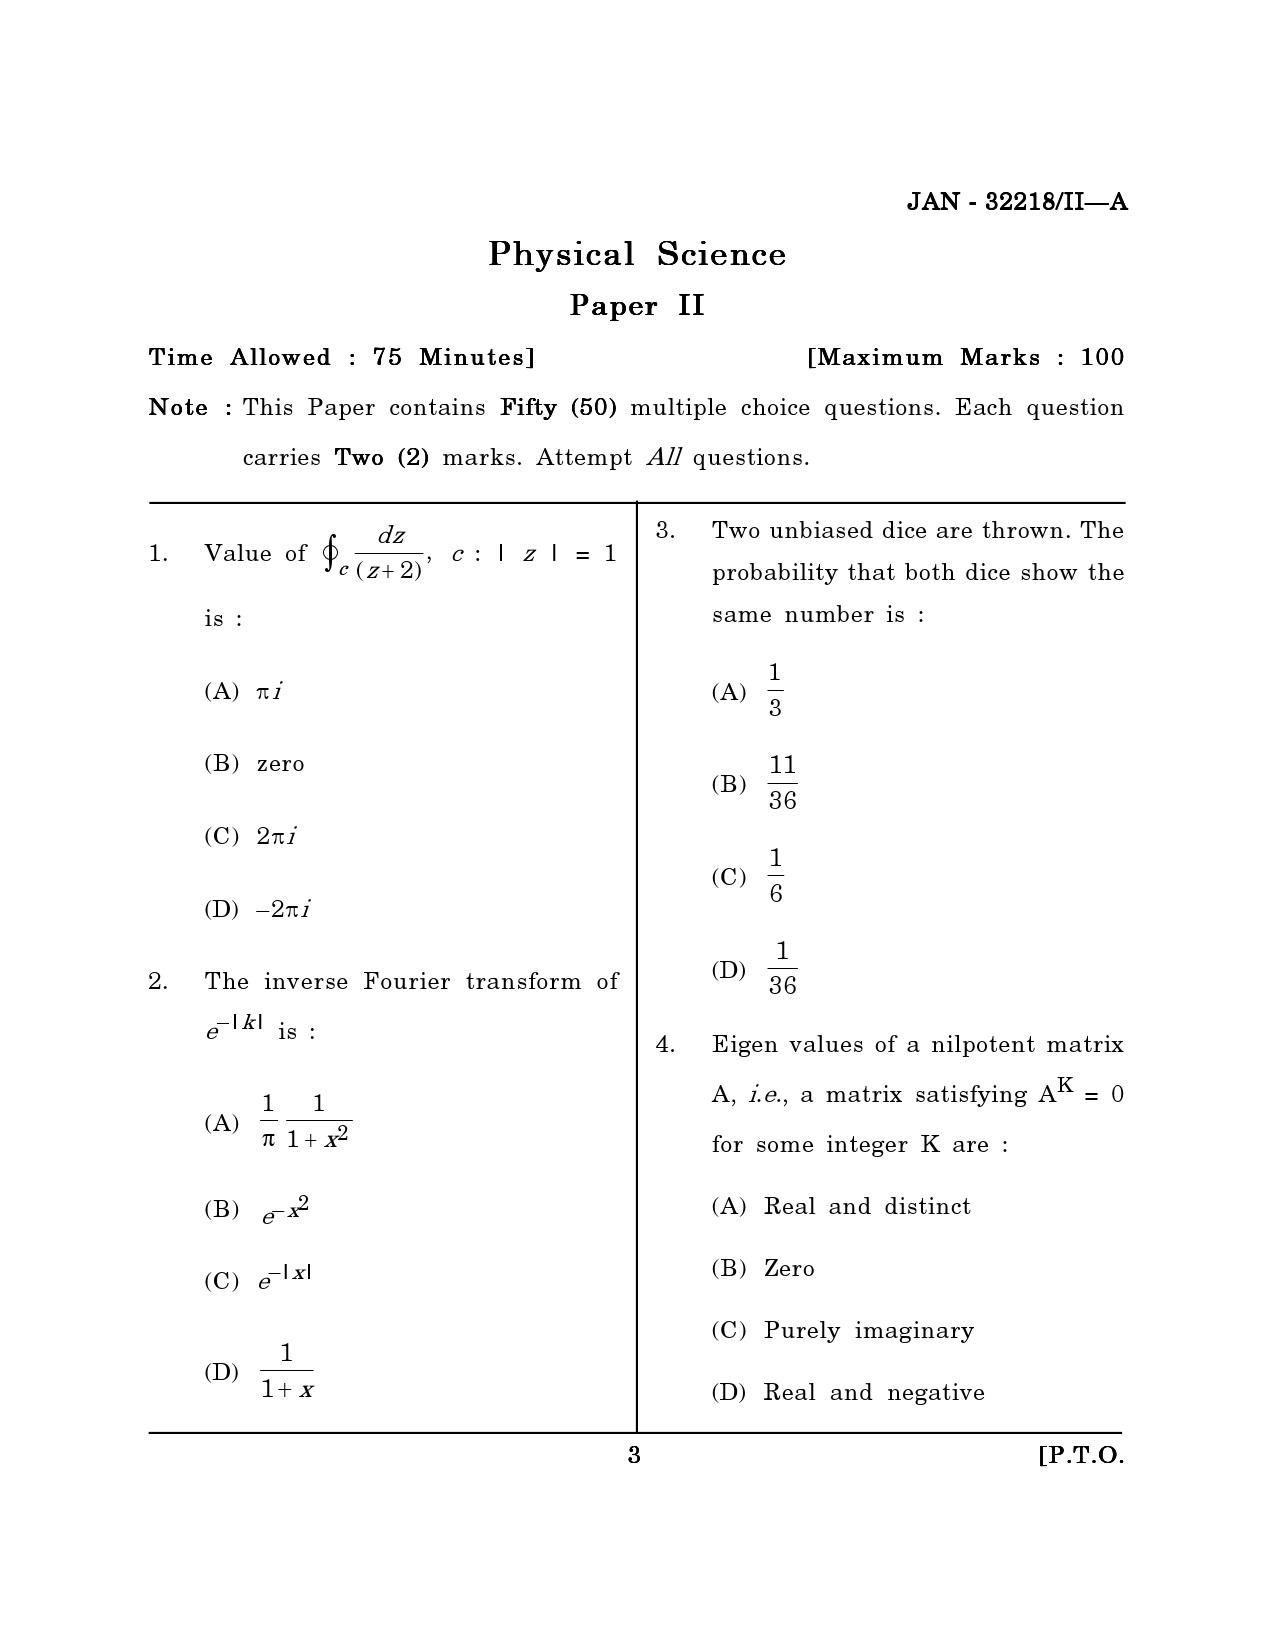 Maharashtra SET Physical Science Question Paper II January 2018 2